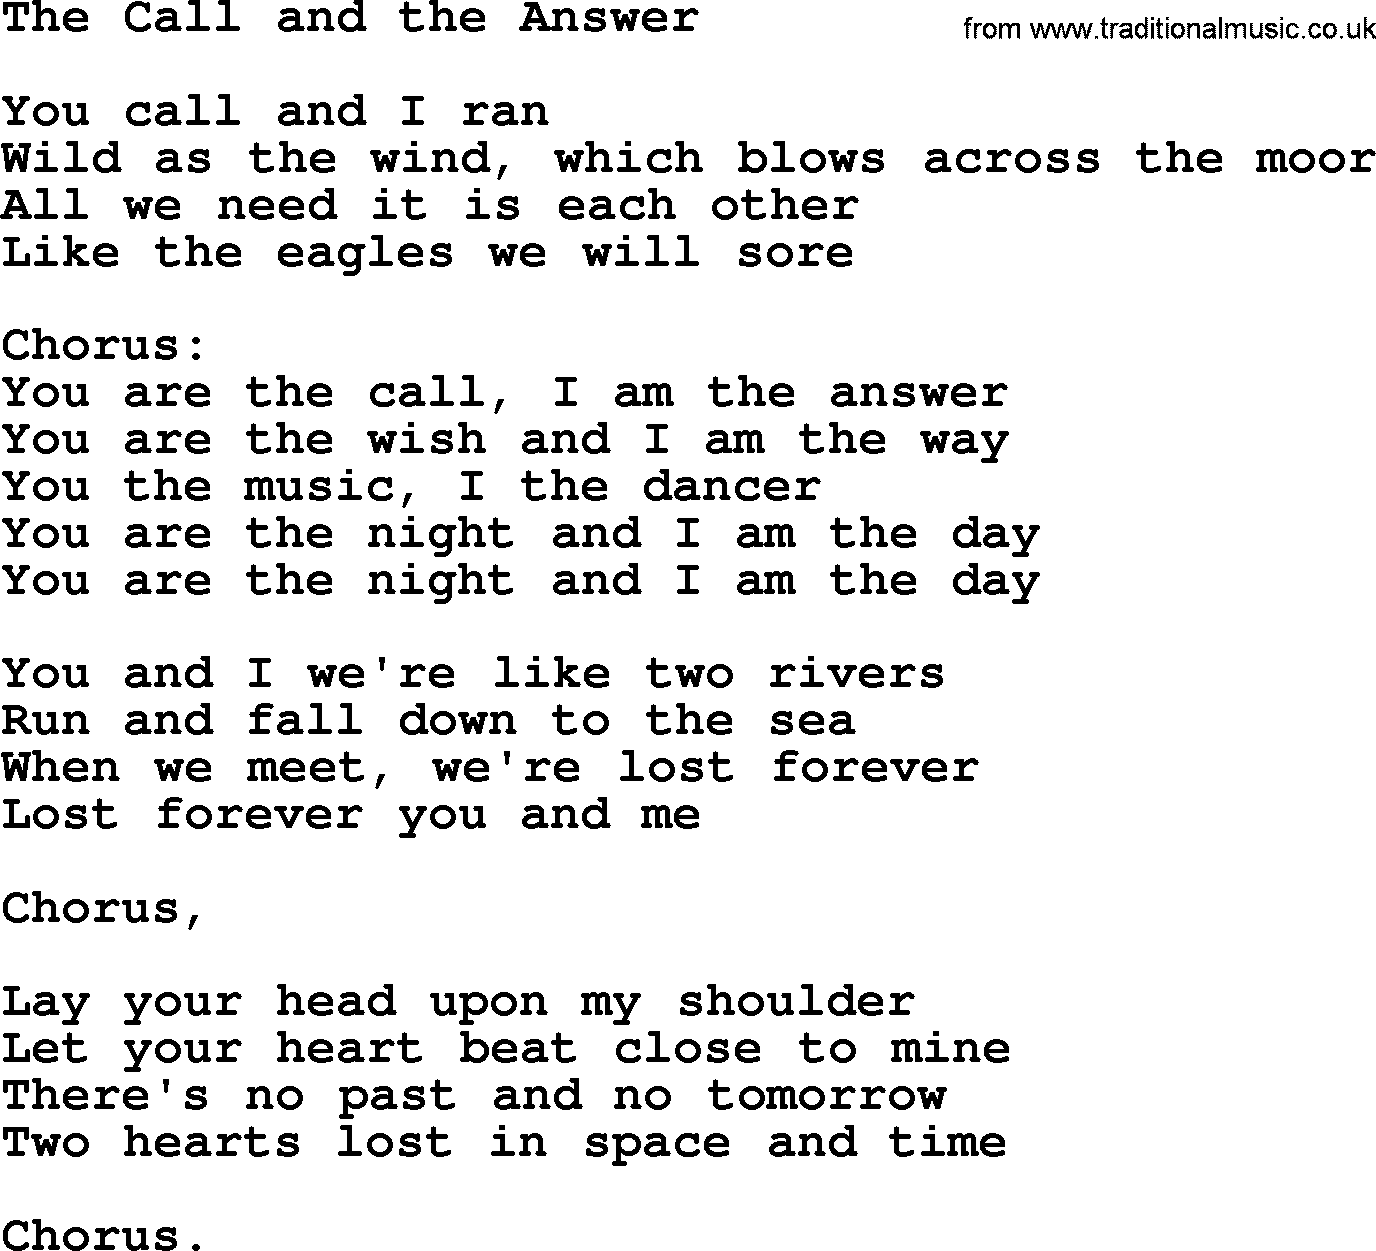 The Dubliners song: The Call And The Answer, lyrics